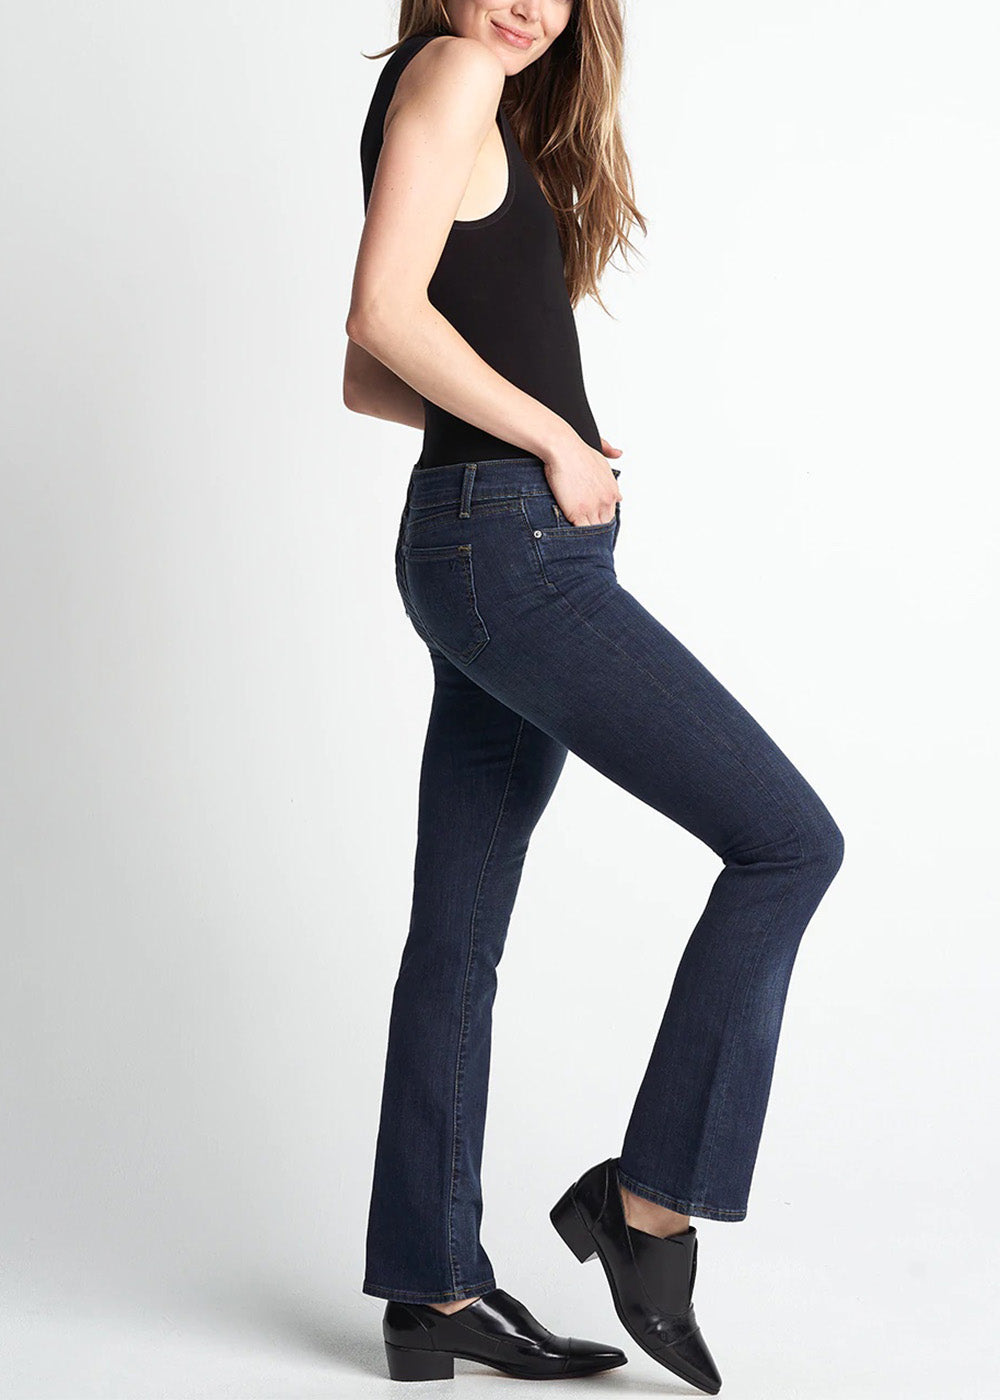 Slim Bootcut Jean from Yummie in 2 Year Fade  - 1